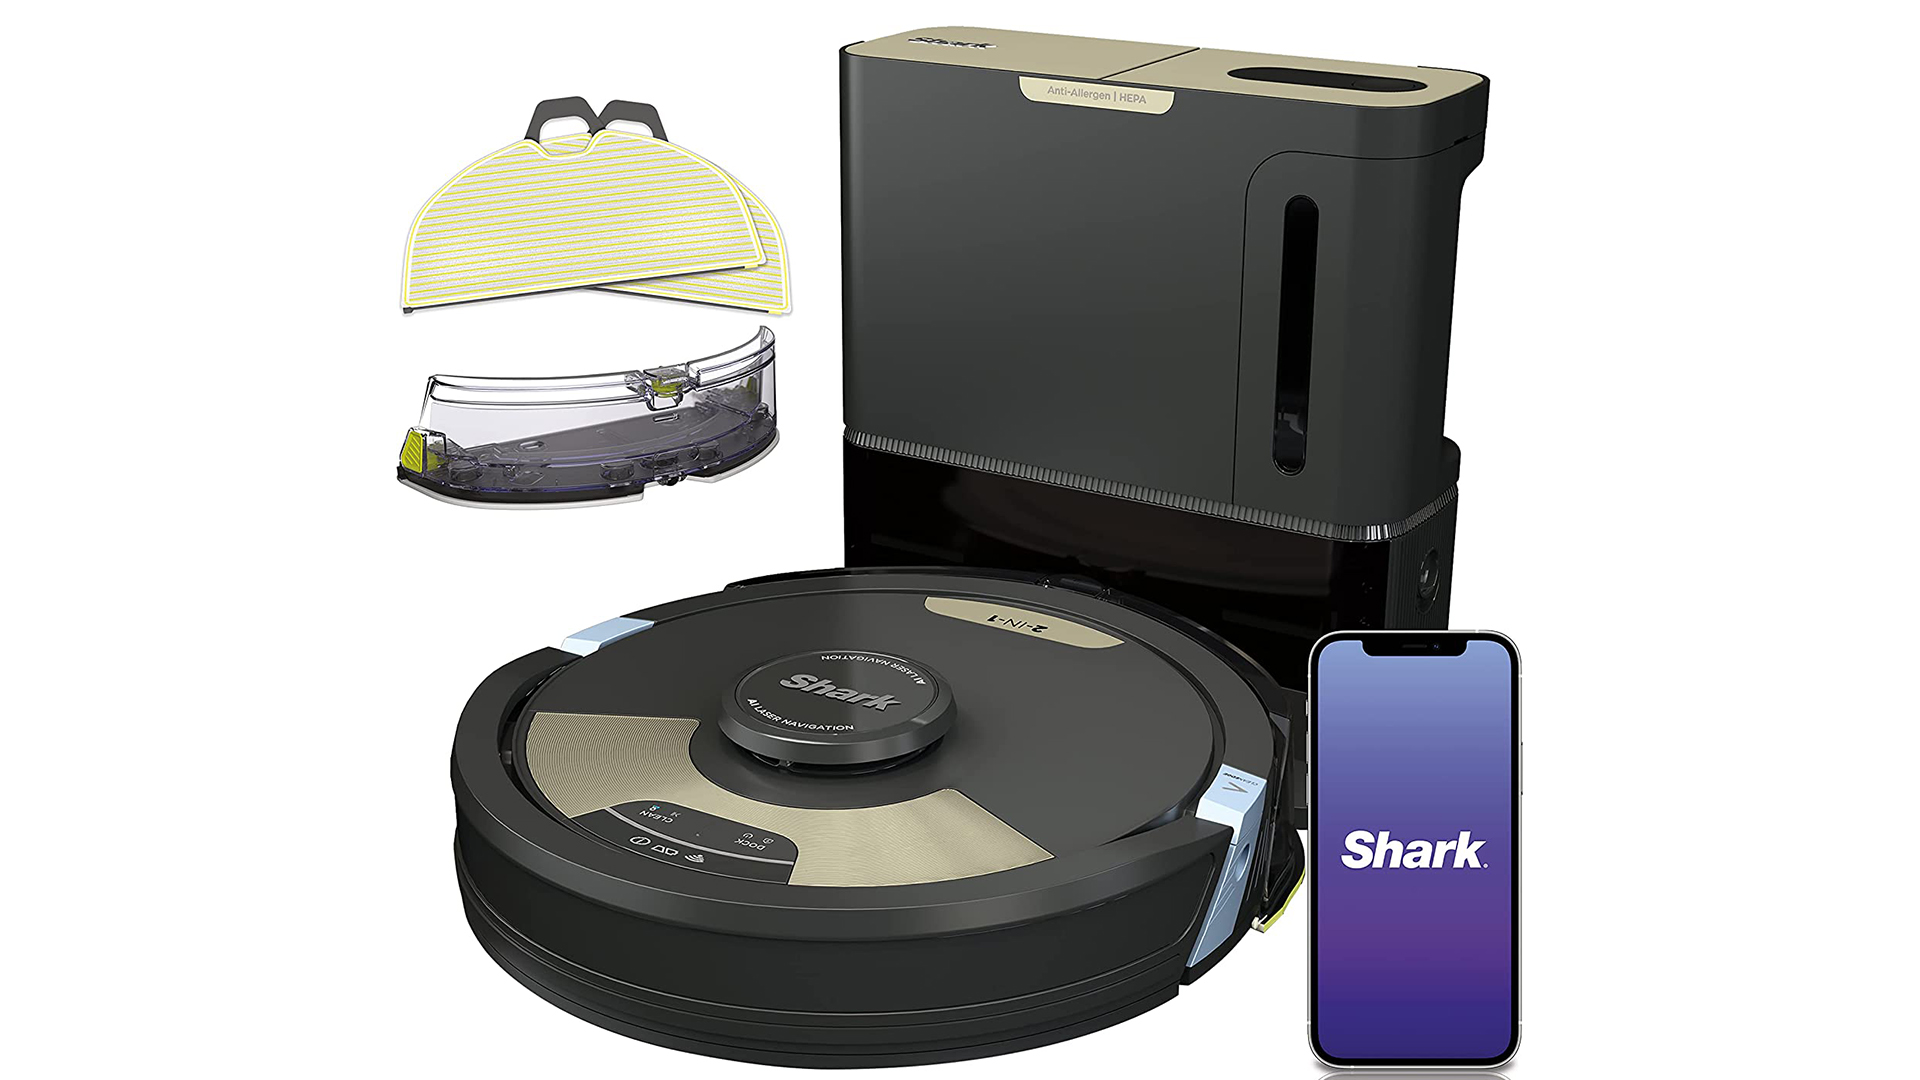 Shark’s new 2-in-1 robot vacuum and mop is cheaper than ever right now